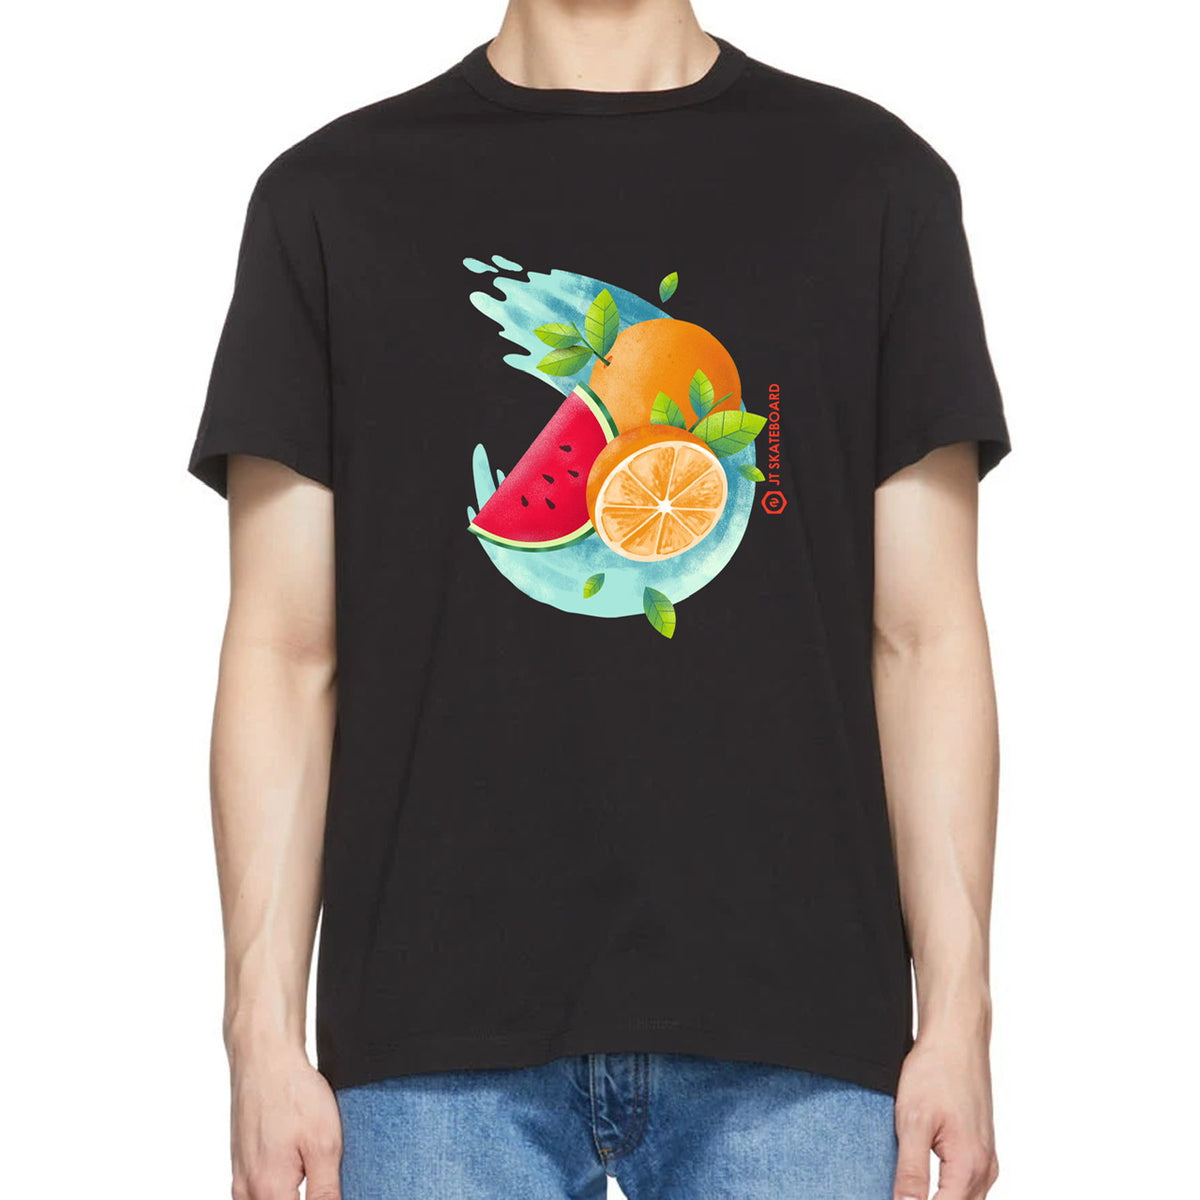 Fruit Puch | Relaxed Loose Fitting T-Shirts - JT Skateboard - JT Skateboard